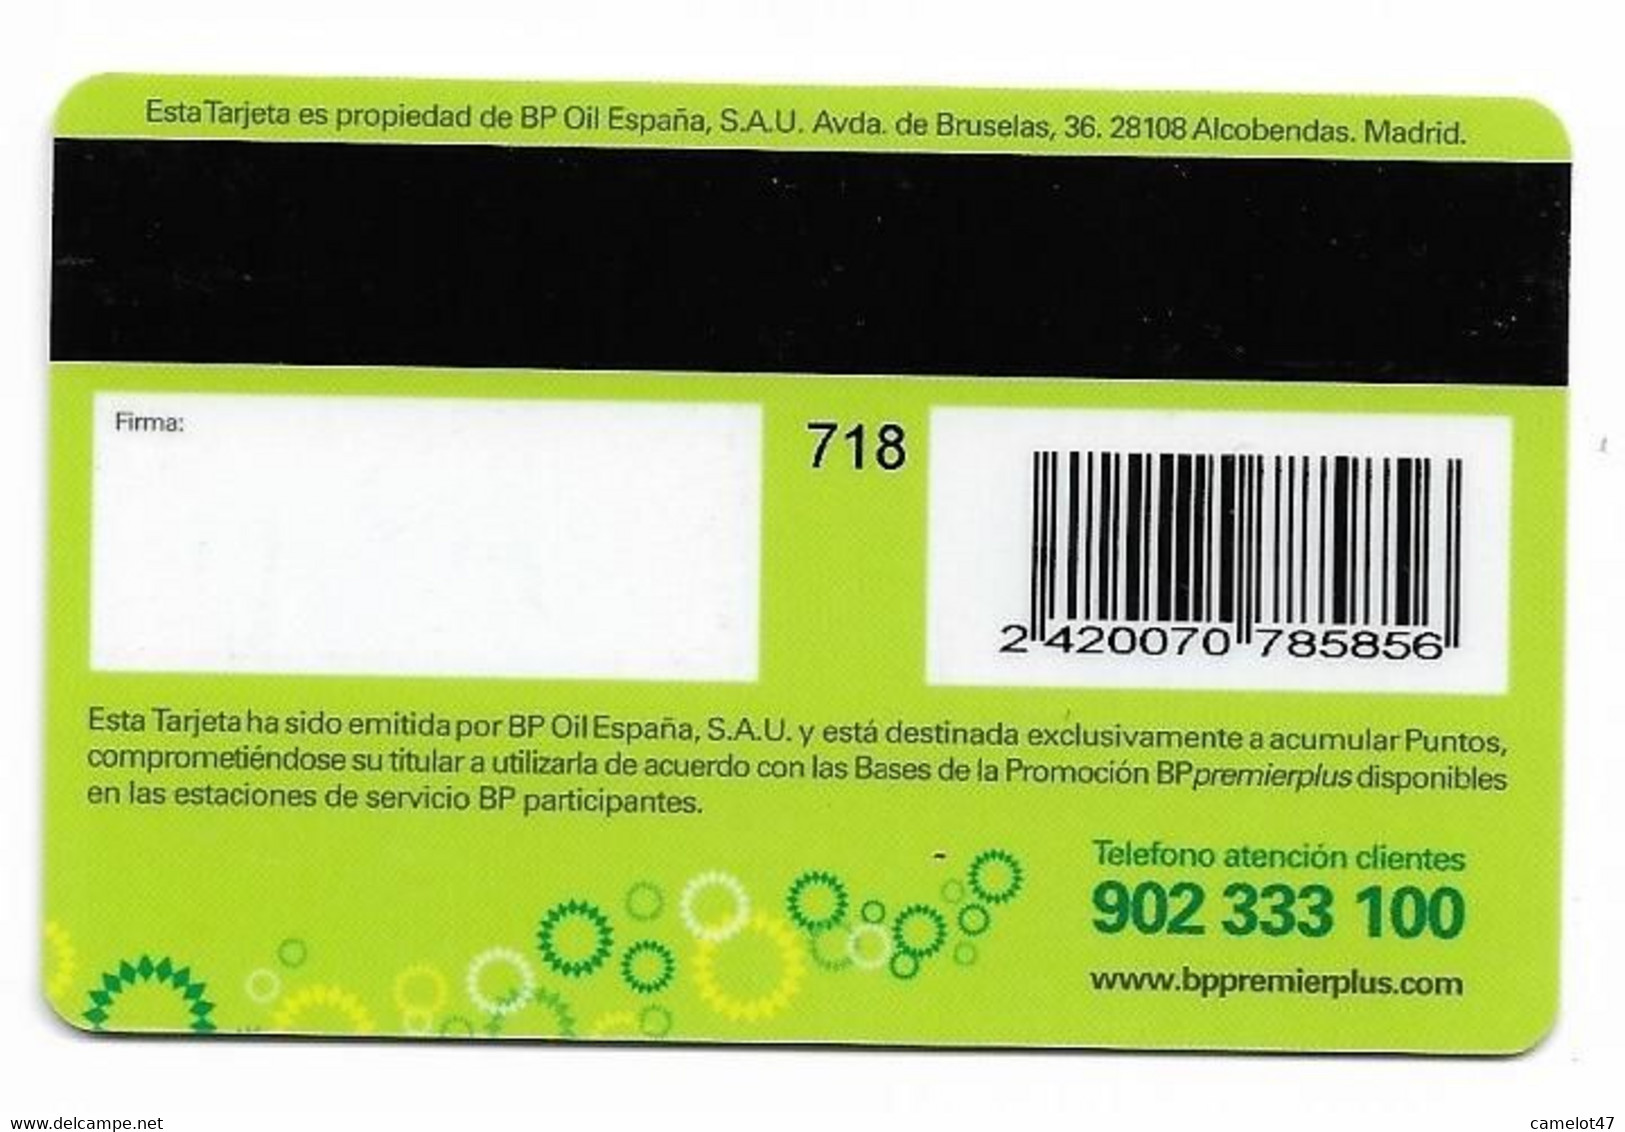 BP Spain, Gas Stations Rewards Magnetic Card, # Bp-1  NOT A PHONE CARD - Oil